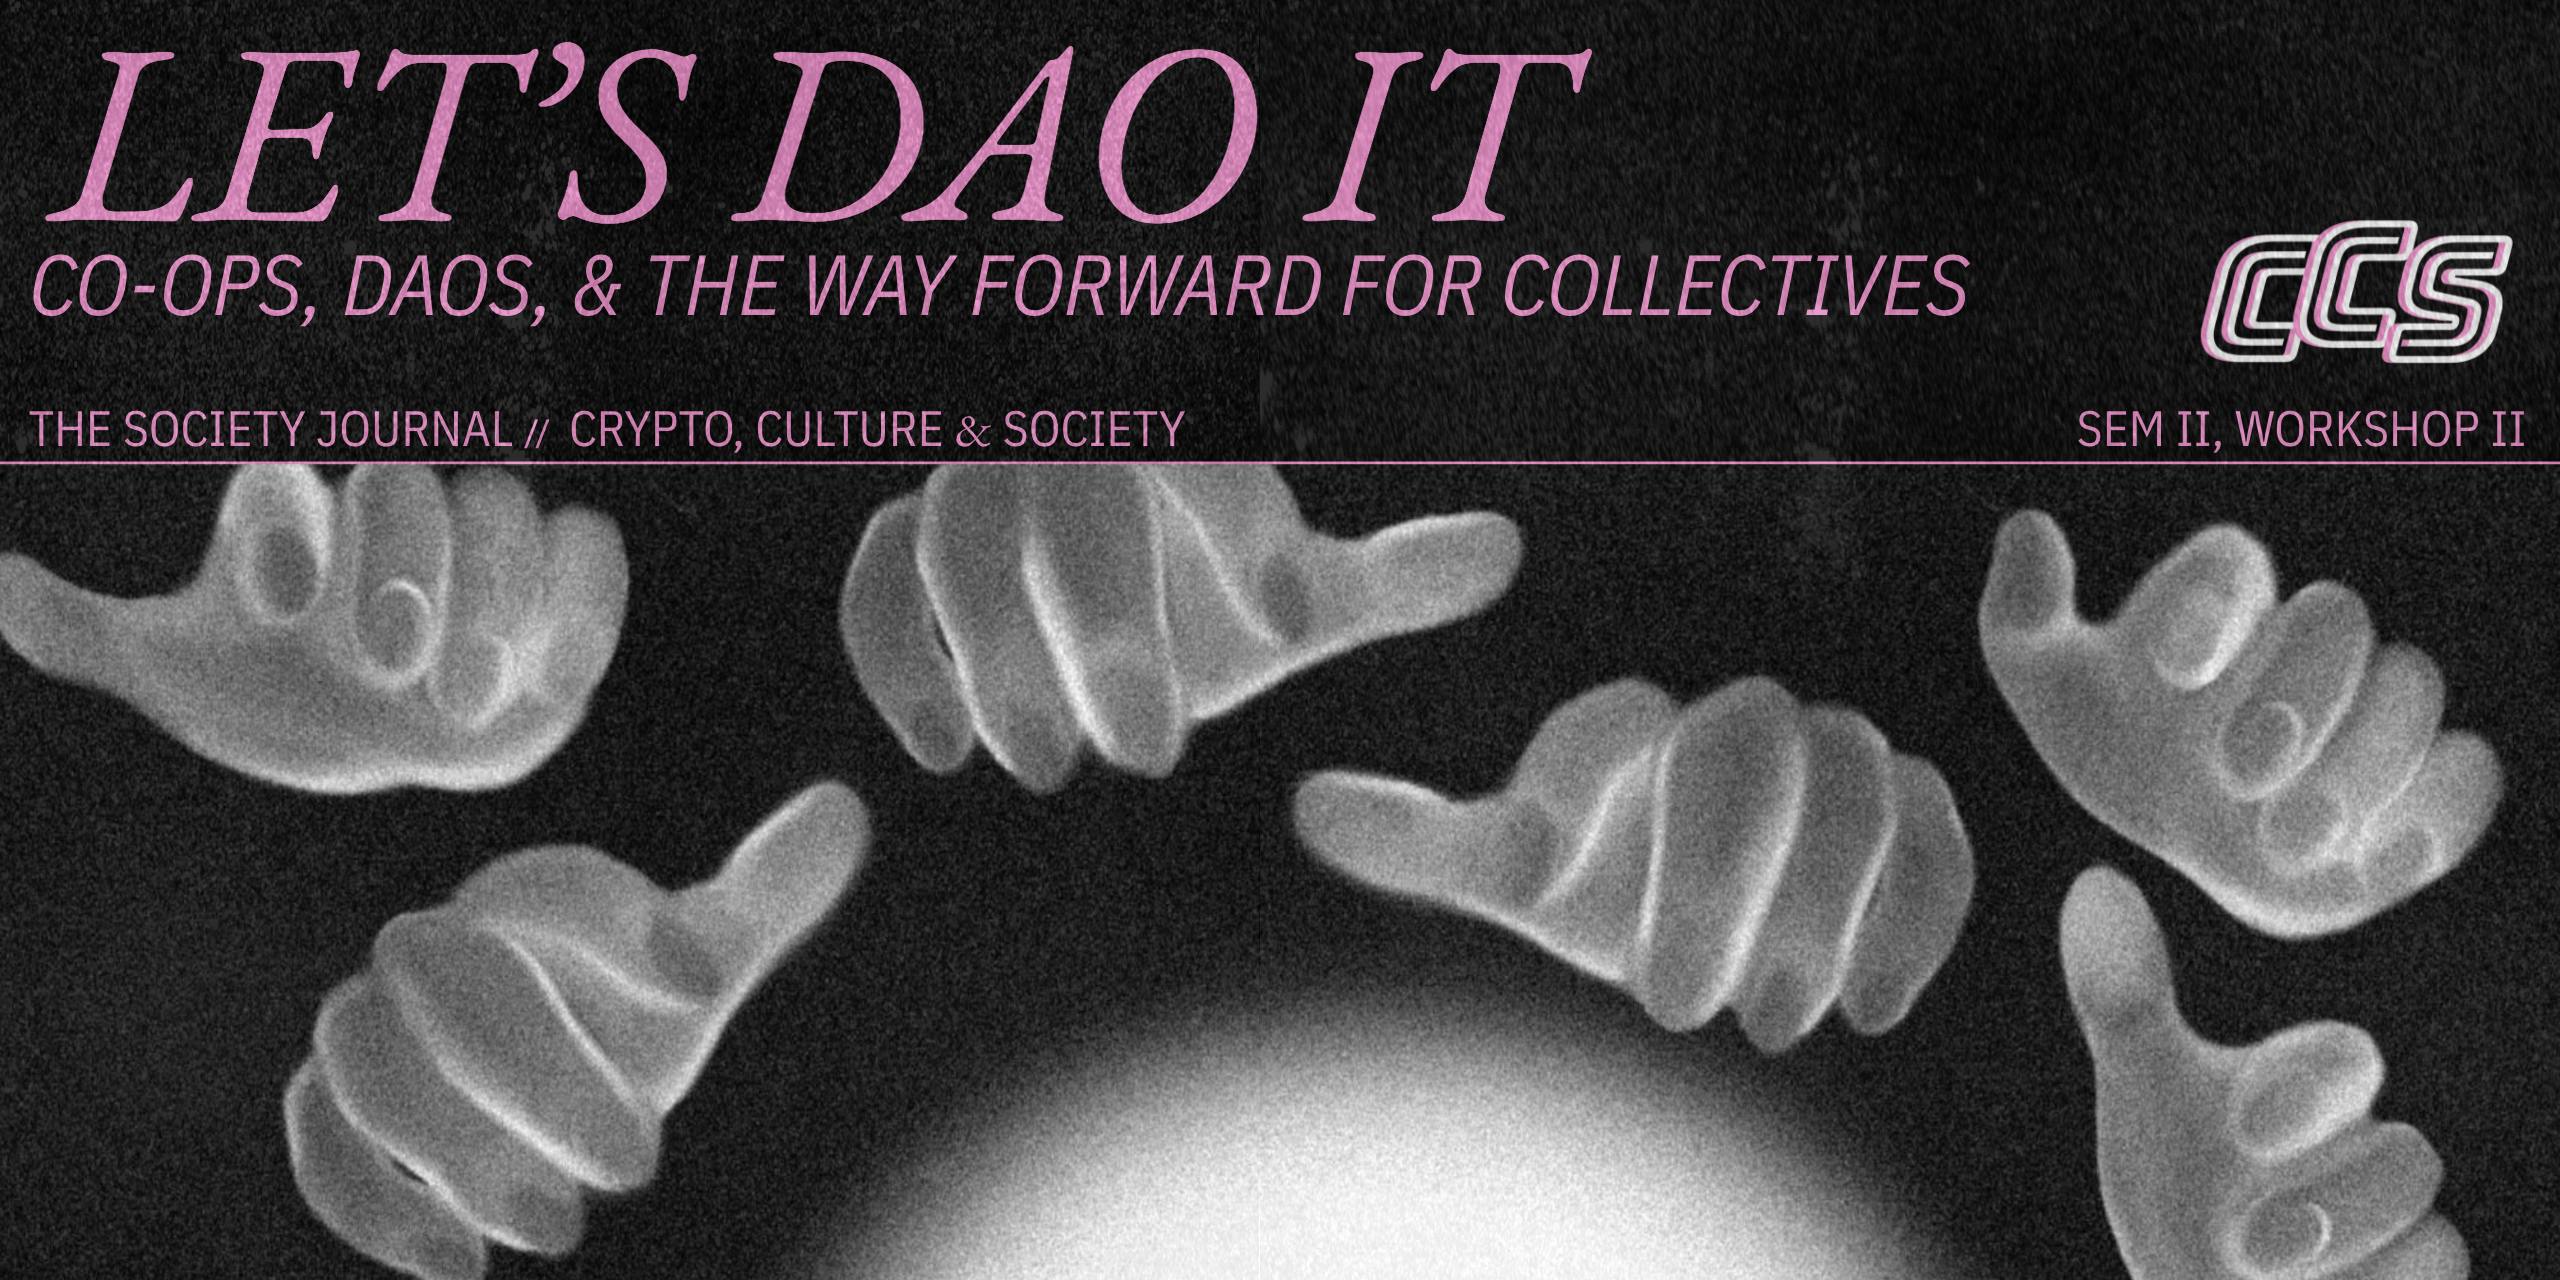 Thumbnail of Co-ops, DAOs, and the way forward for collectives